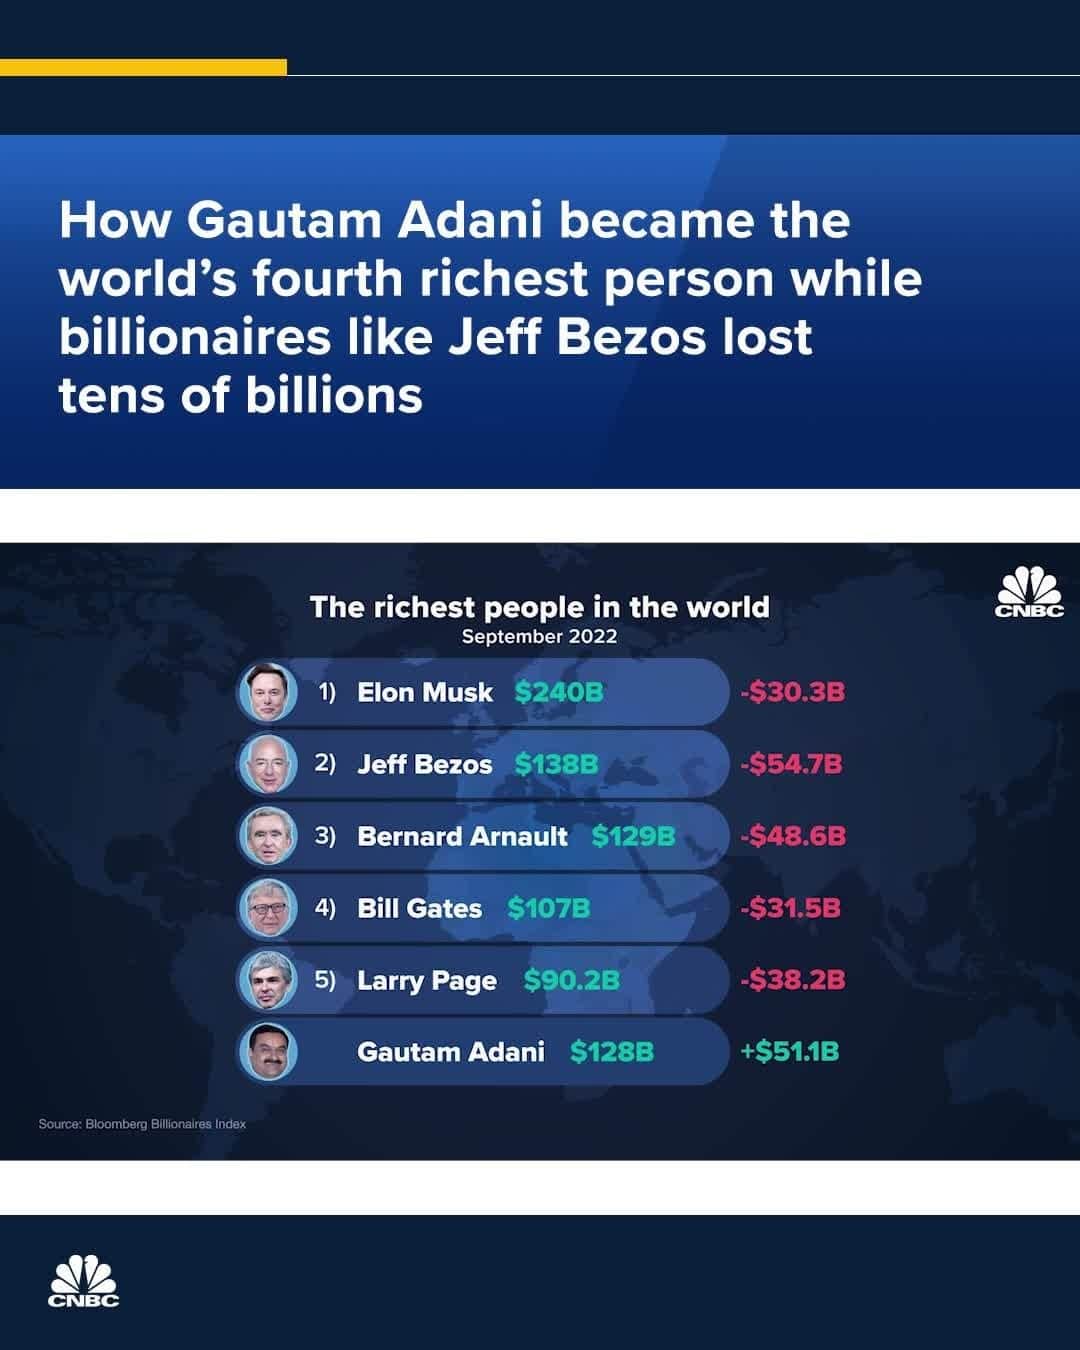 CNBCのインスタグラム：「Gautam Adani has had a very good year.⁠ ⁠ The Indian billionaire briefly surpassed Amazon founder Jeff Bezos to become the second-richest person in the world in September, according to Bloomberg. He’s now ranked as the world’s fourth wealthiest person.⁠ ⁠ Outside Southeast Asia, Adani is hardly a household name. That might be changing now that he’s richer than Microsoft founder Bill Gates and iconic investor Warren Buffett.⁠ ⁠ Why is Adani’s wealth on the rise? Link in bio to see about how Adani’s political connections may have boosted the success of his many companies.」